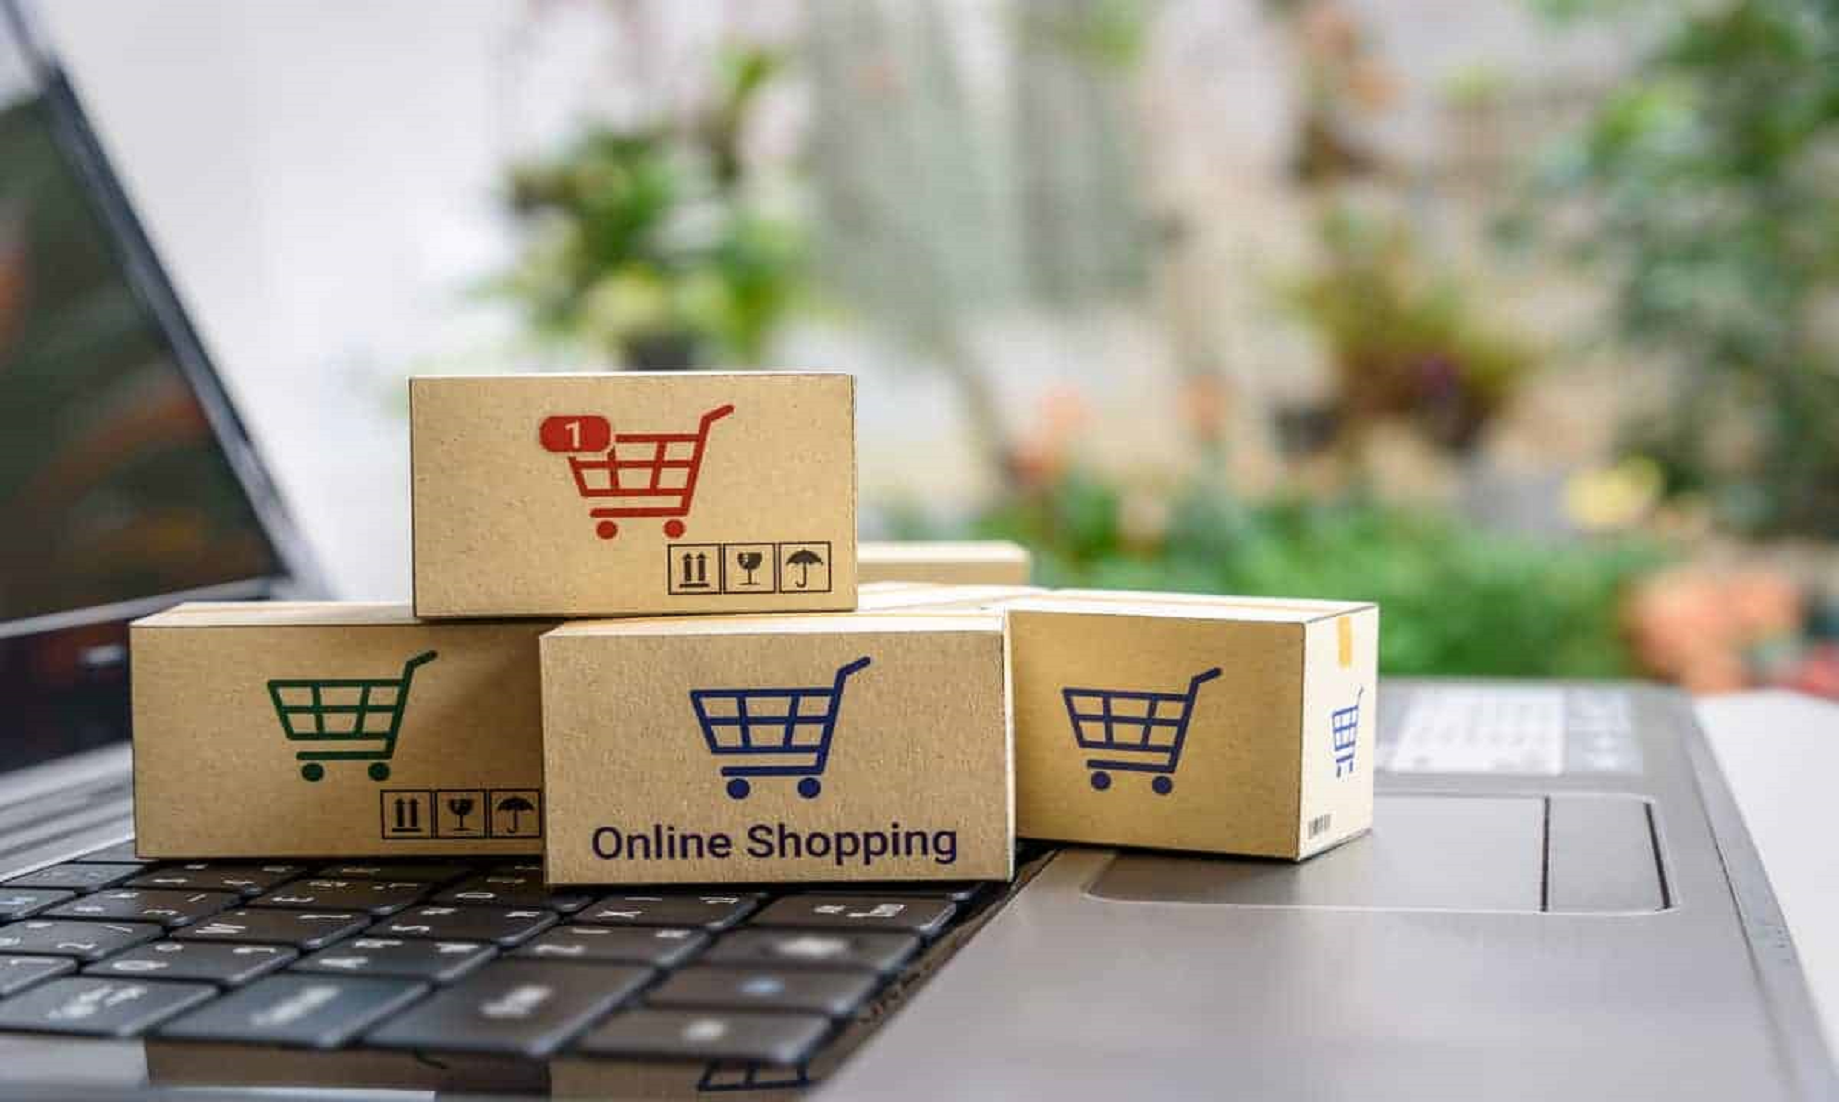 S.Korea’s Online Shopping Hits Record High In Q3